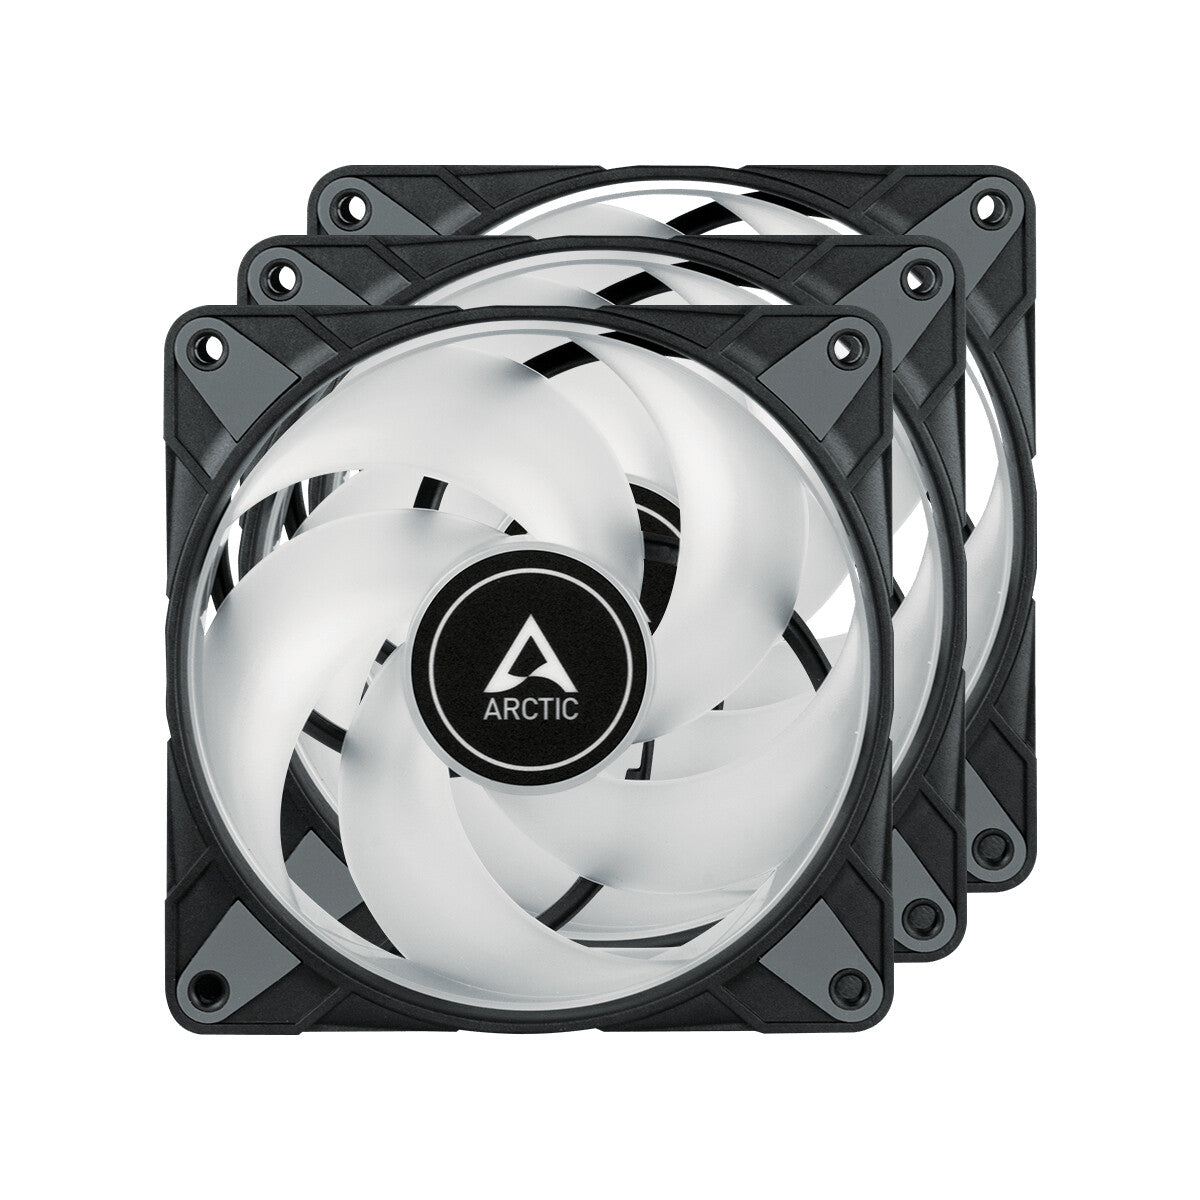 ARCTIC P12 A-RGB - PWM PST Case Fan (Pack of 3)